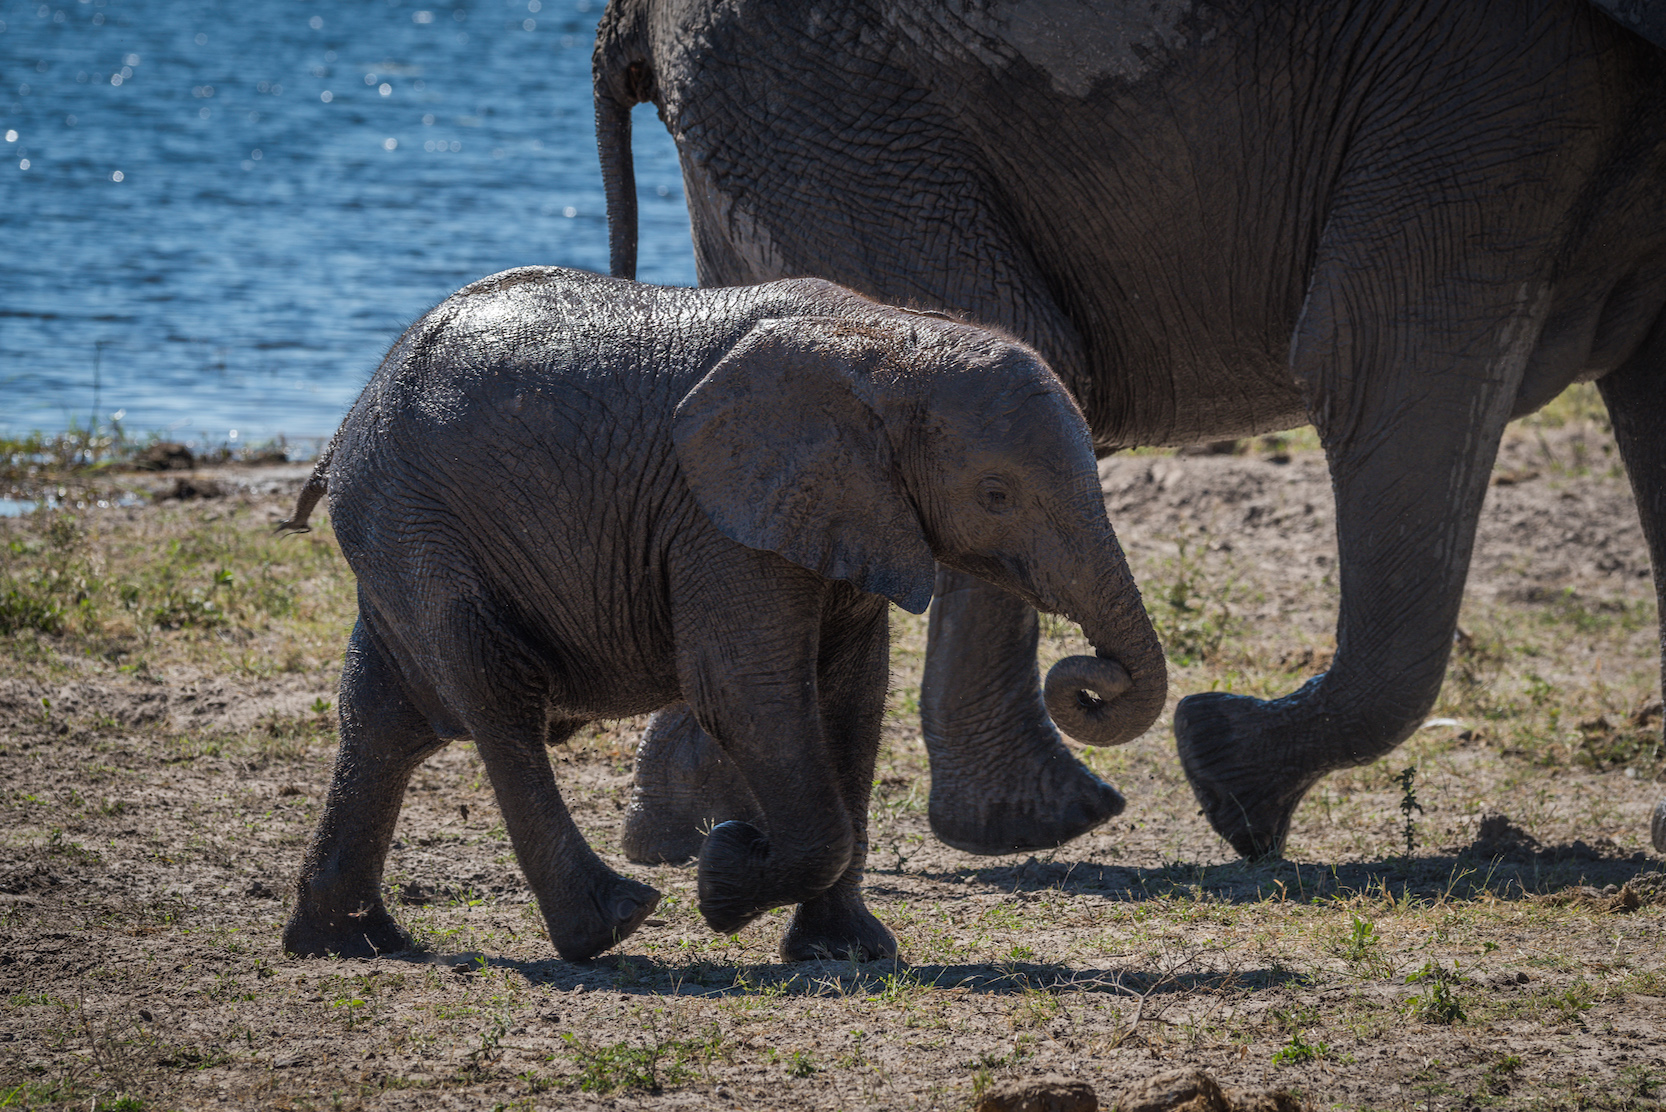 Baby elephant walking with mother beside river